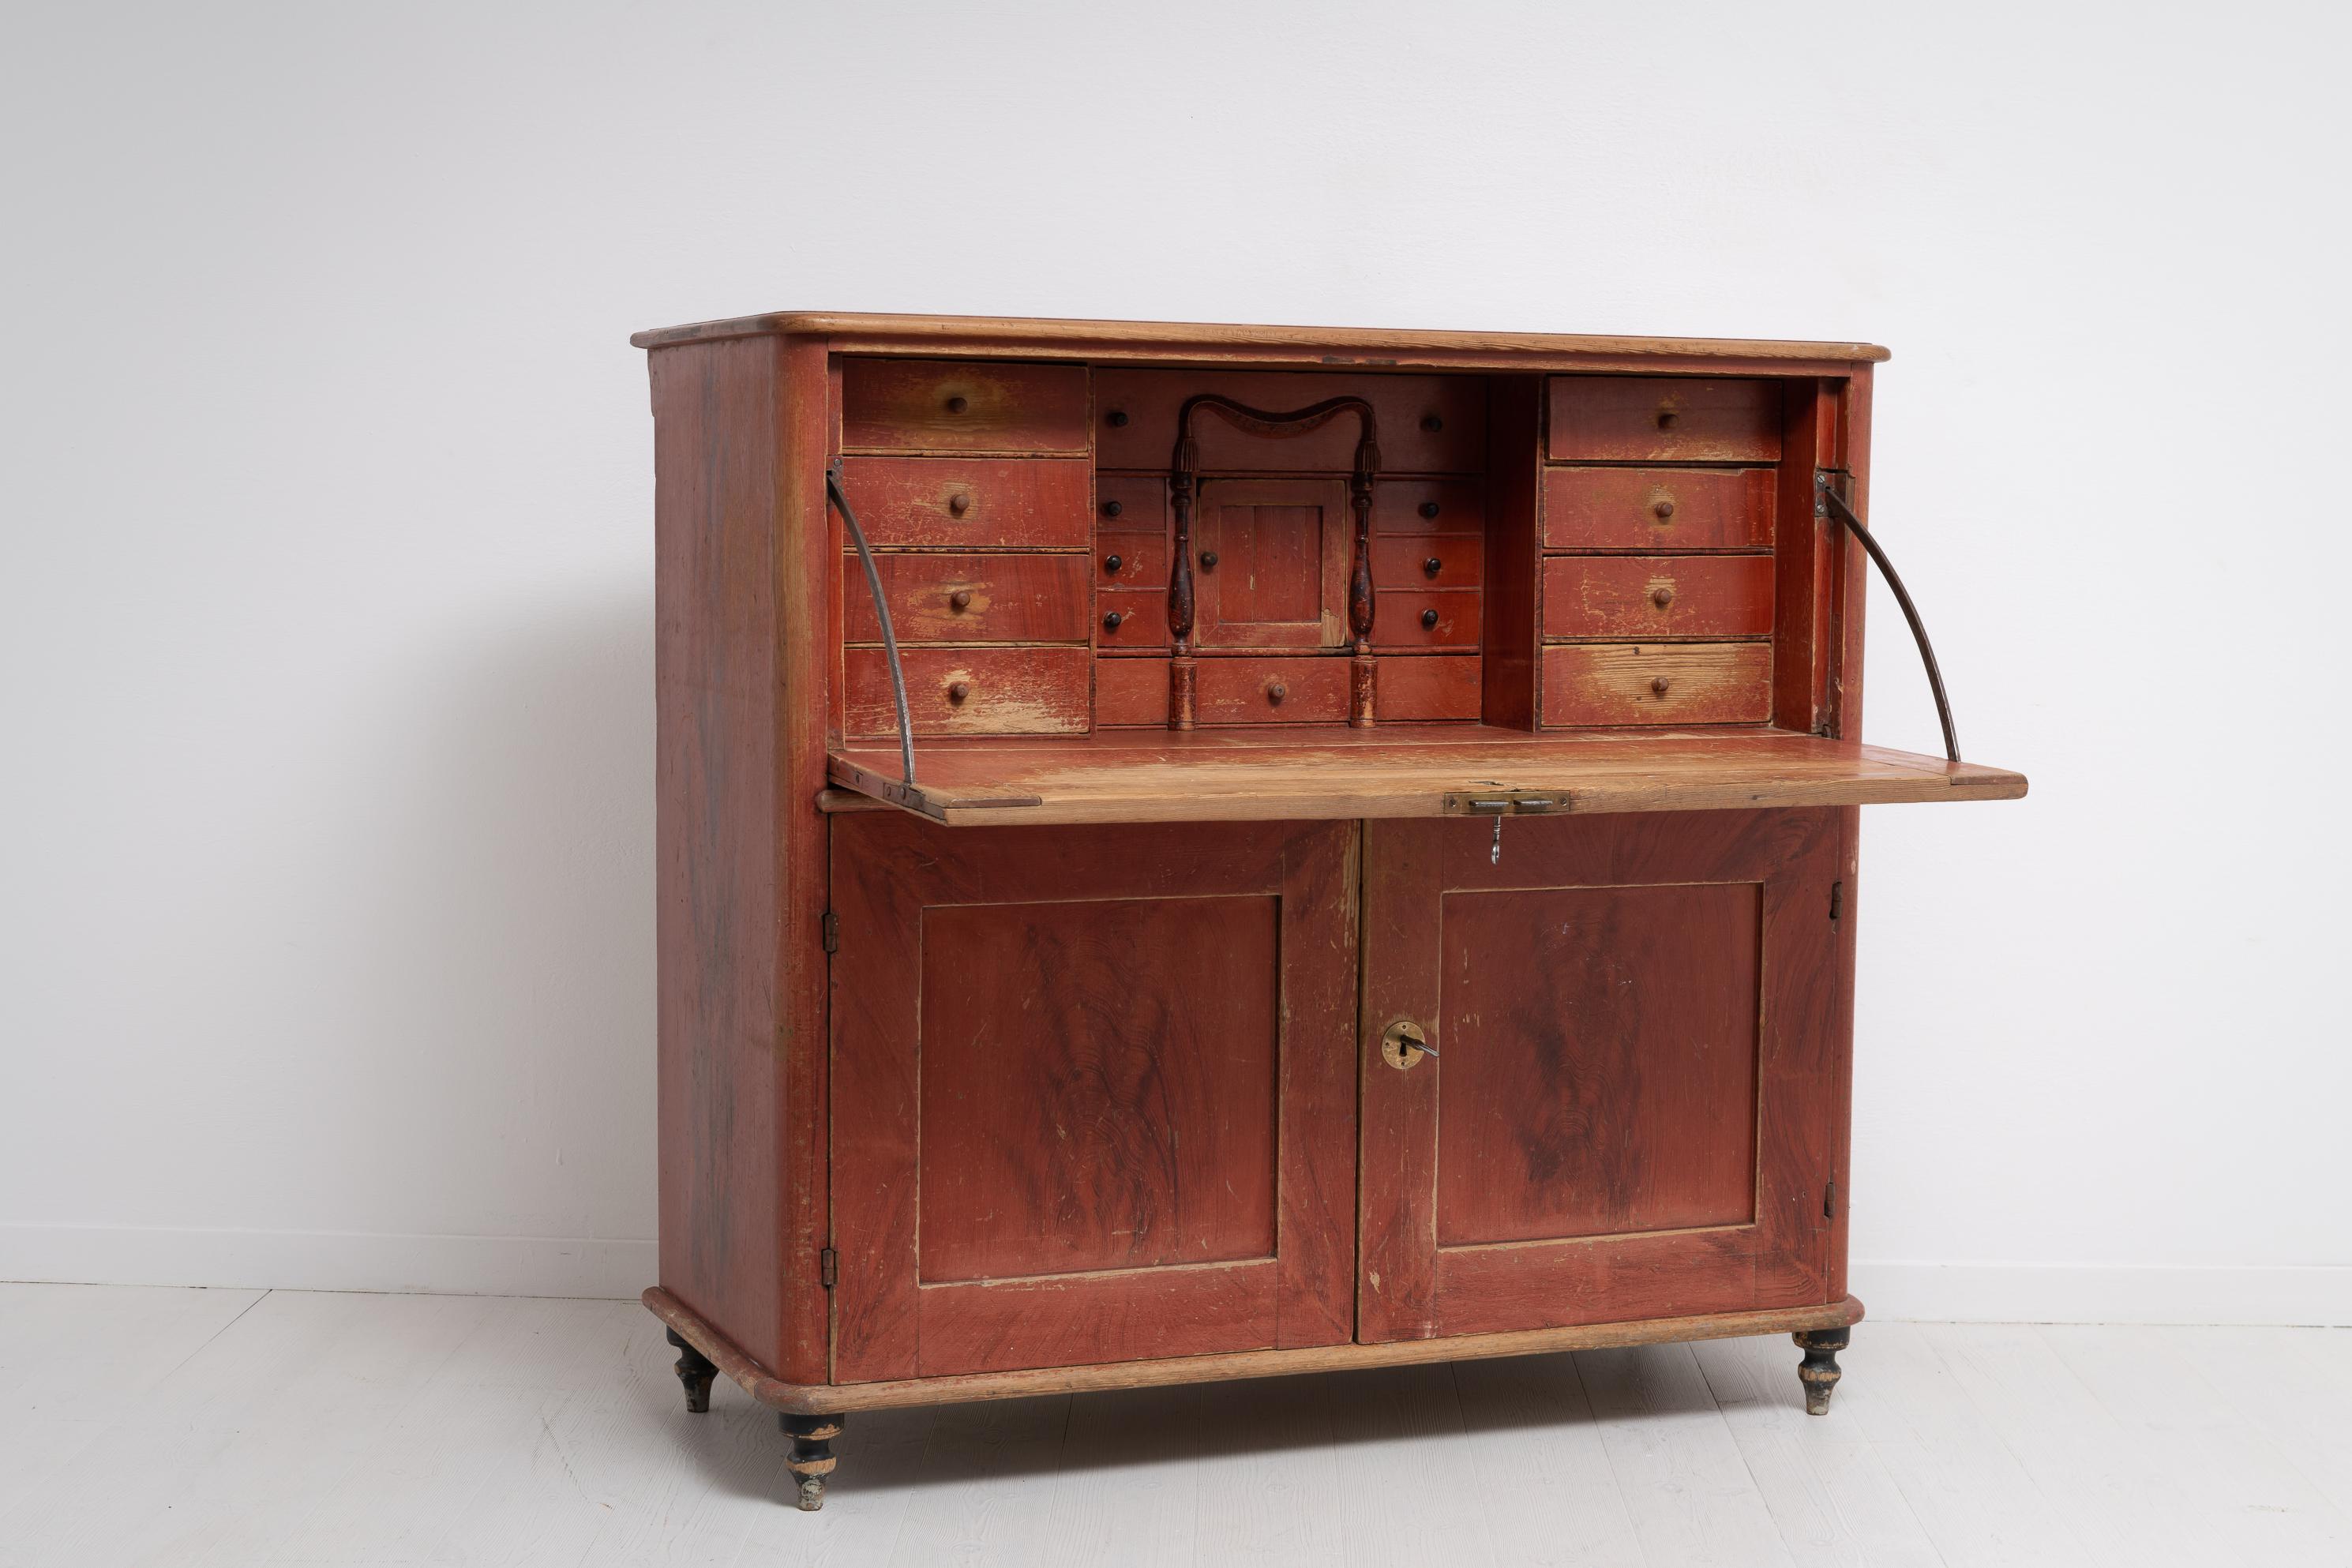 Unusual country secretaire from the empire period Northern Sweden, 1820 to 1840. Painted with the original faux paint and in original condition. The secretaire is made in Swedish pine and has old hardware in brass. The writers desk has an interior